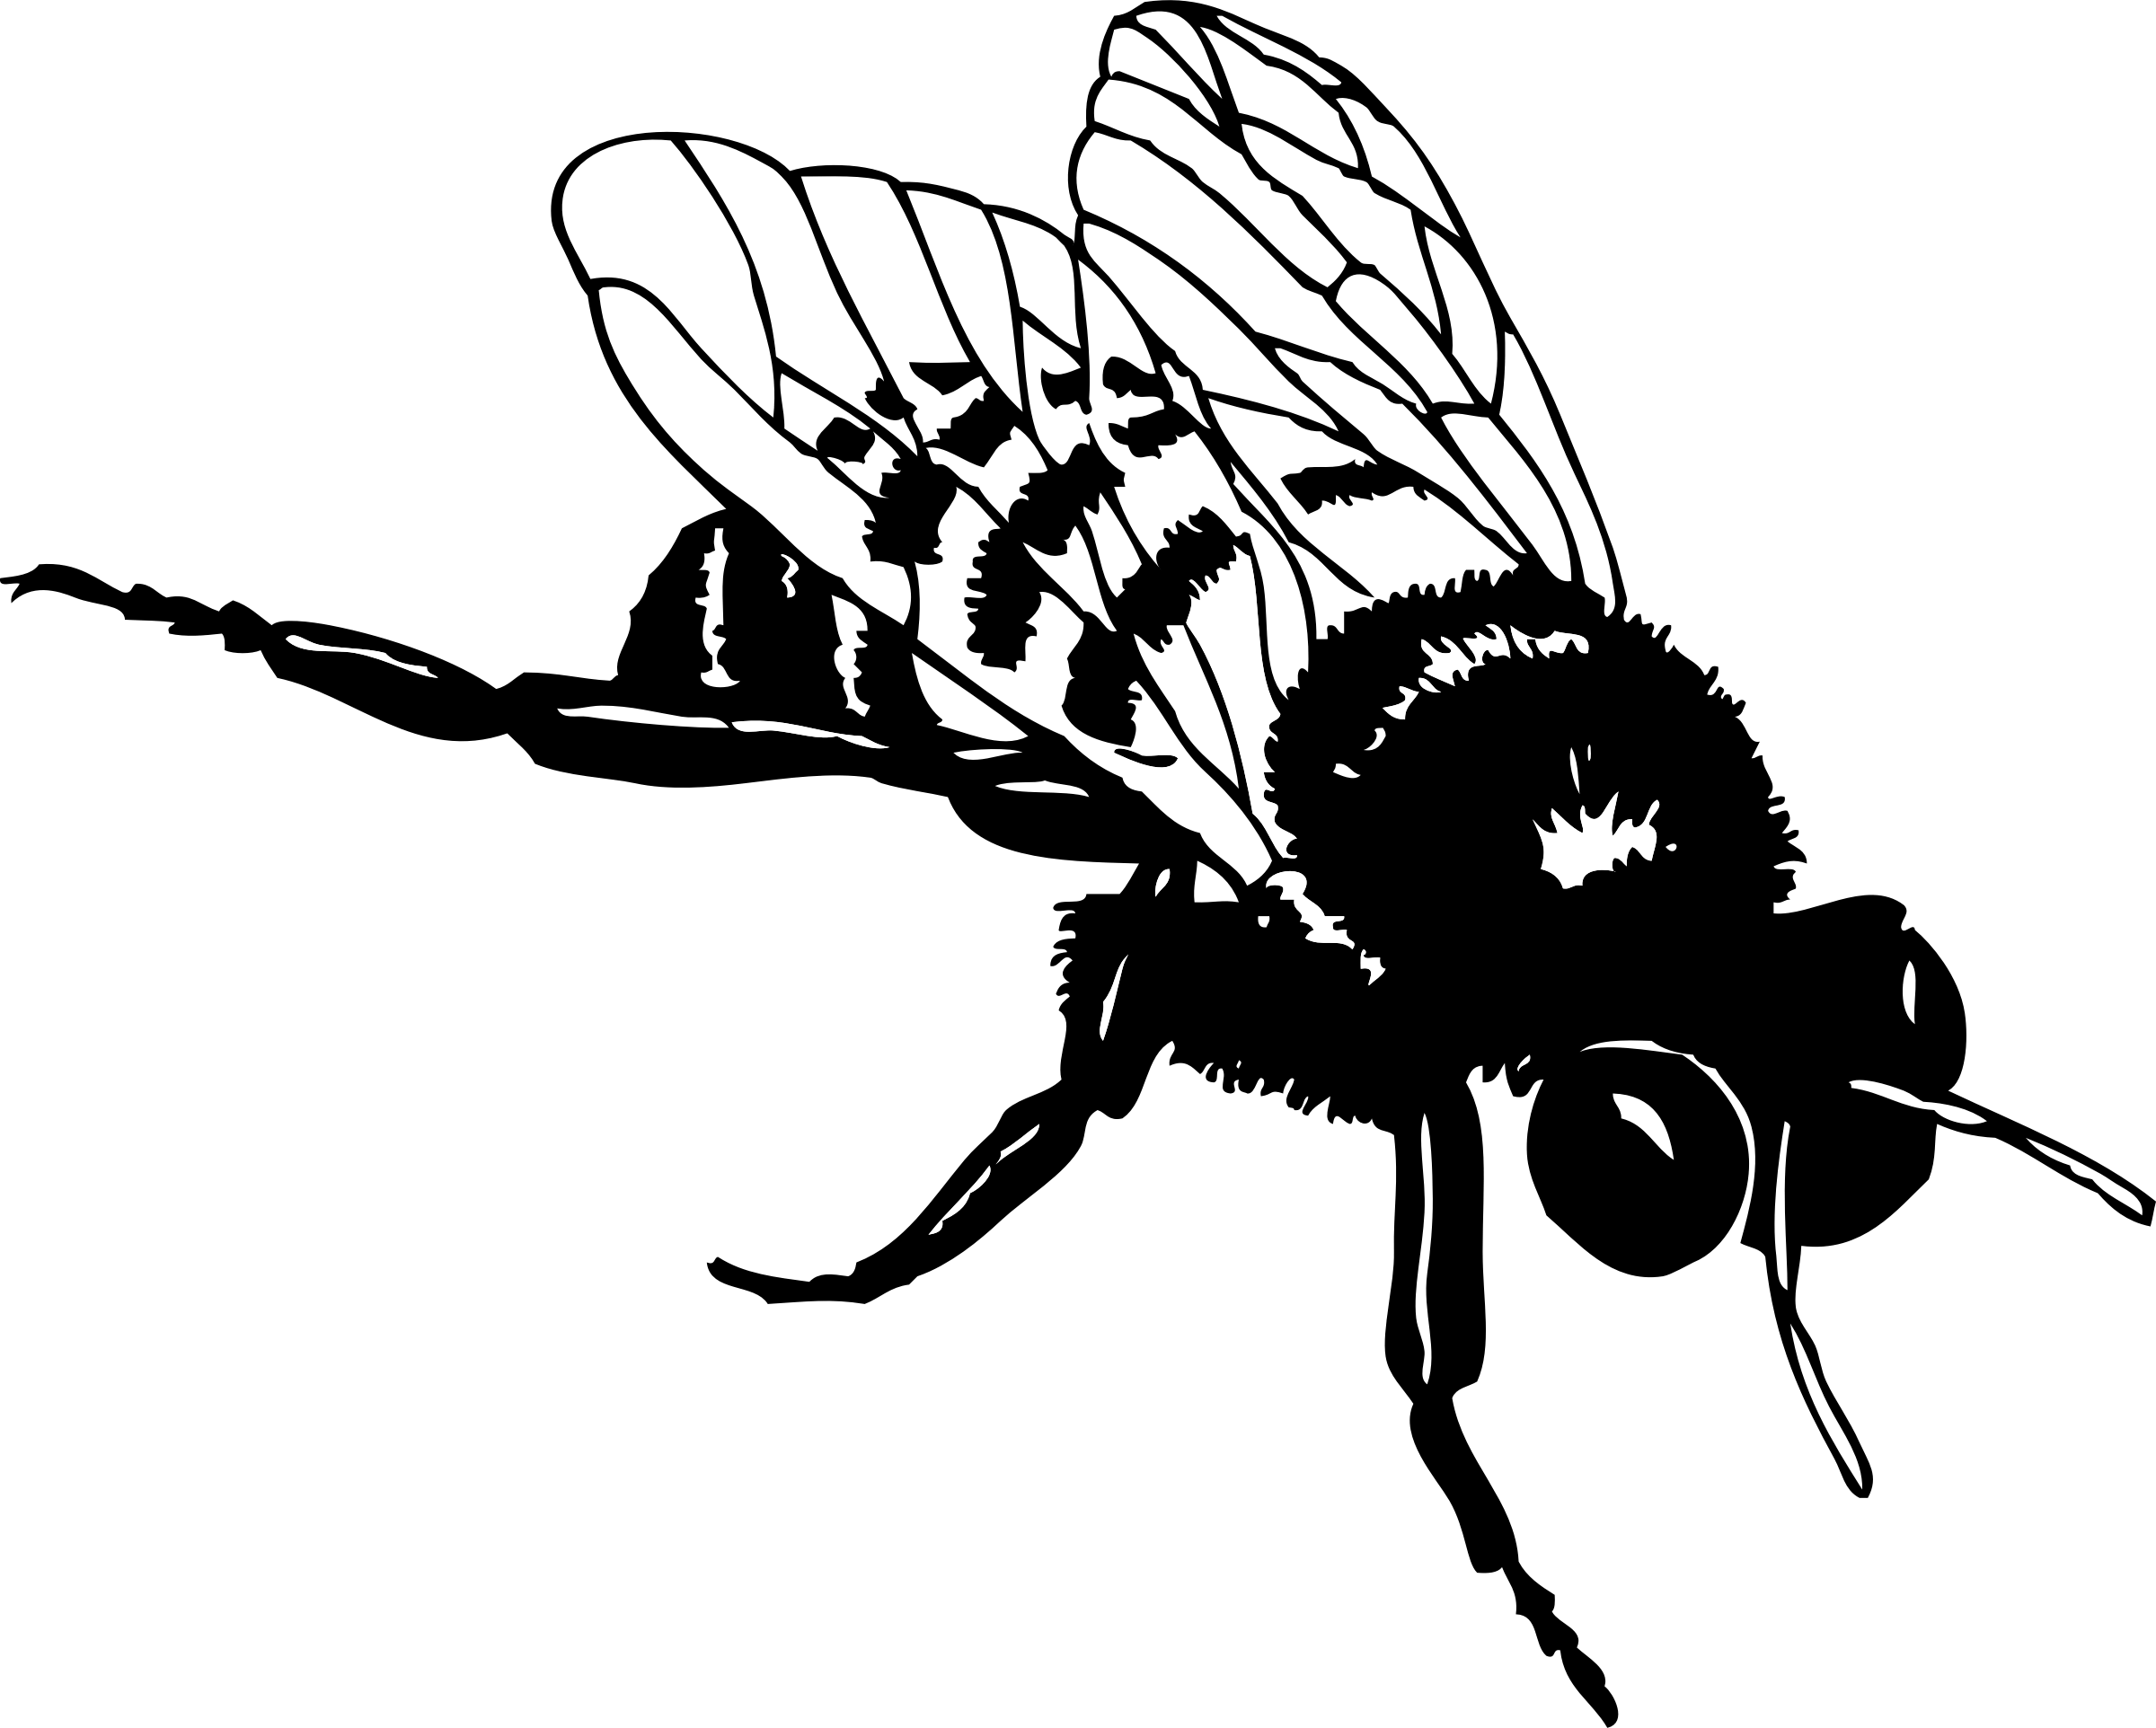 Bee Png Clipart (16 Image) png